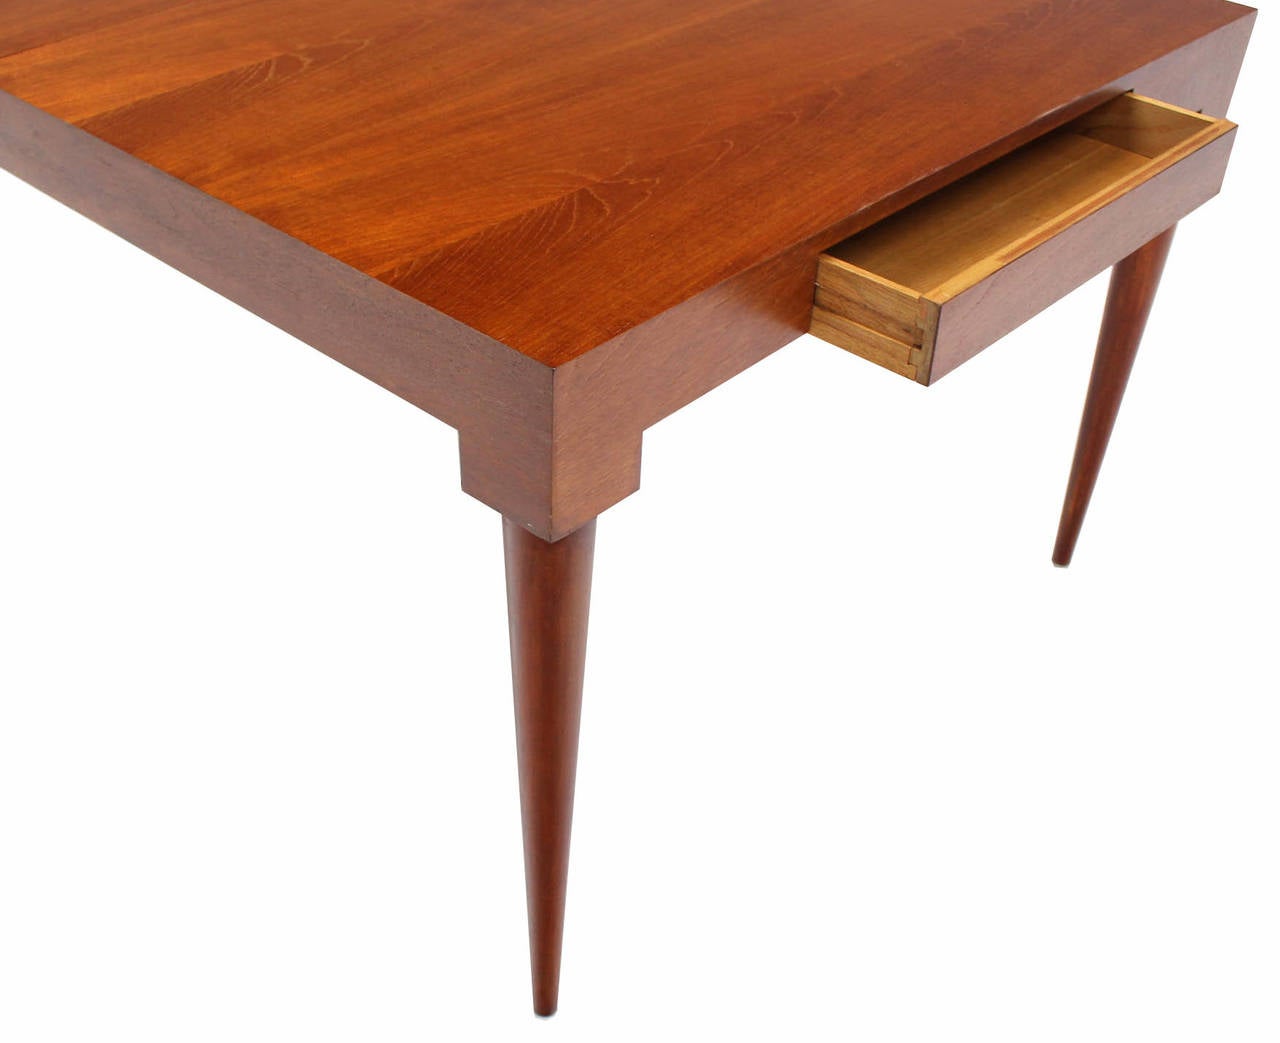 20th Century American Mid-Century Modern Teak Dining Table with Two Leaves